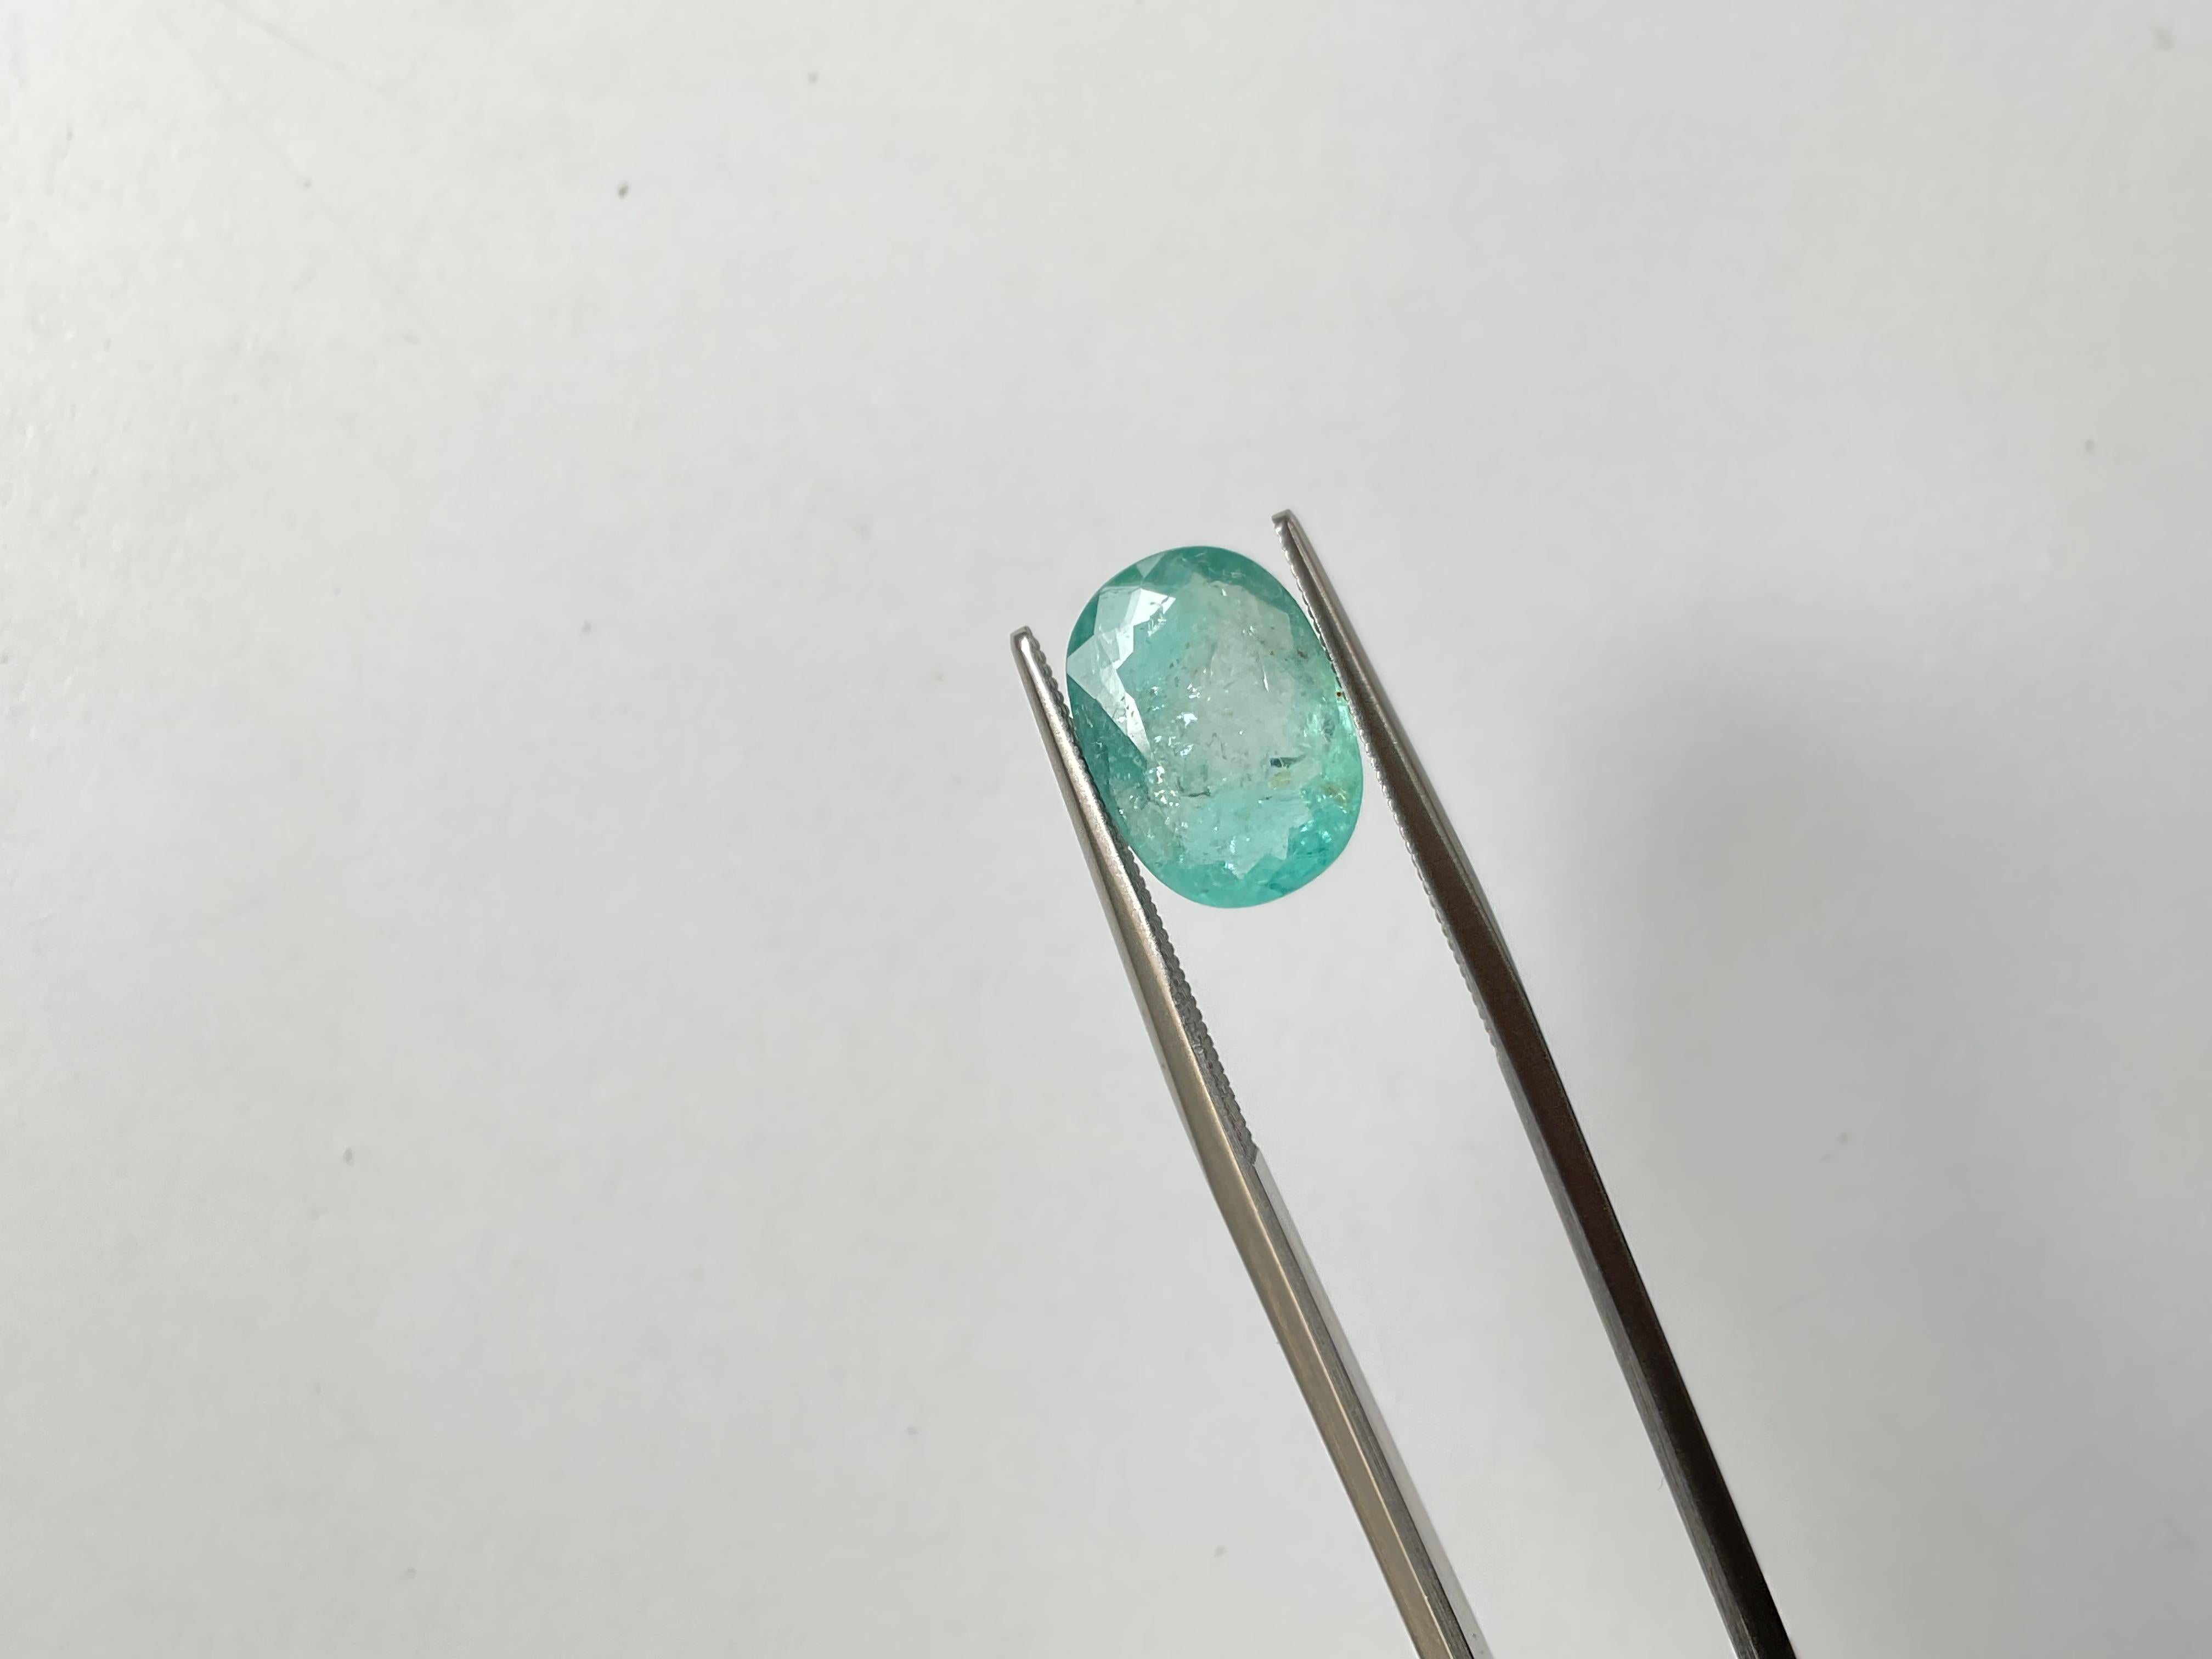 Certified 3.47 Carats Paraiba Tourmaline Oval Cut Stone for Fine Jewelry For Sale 2